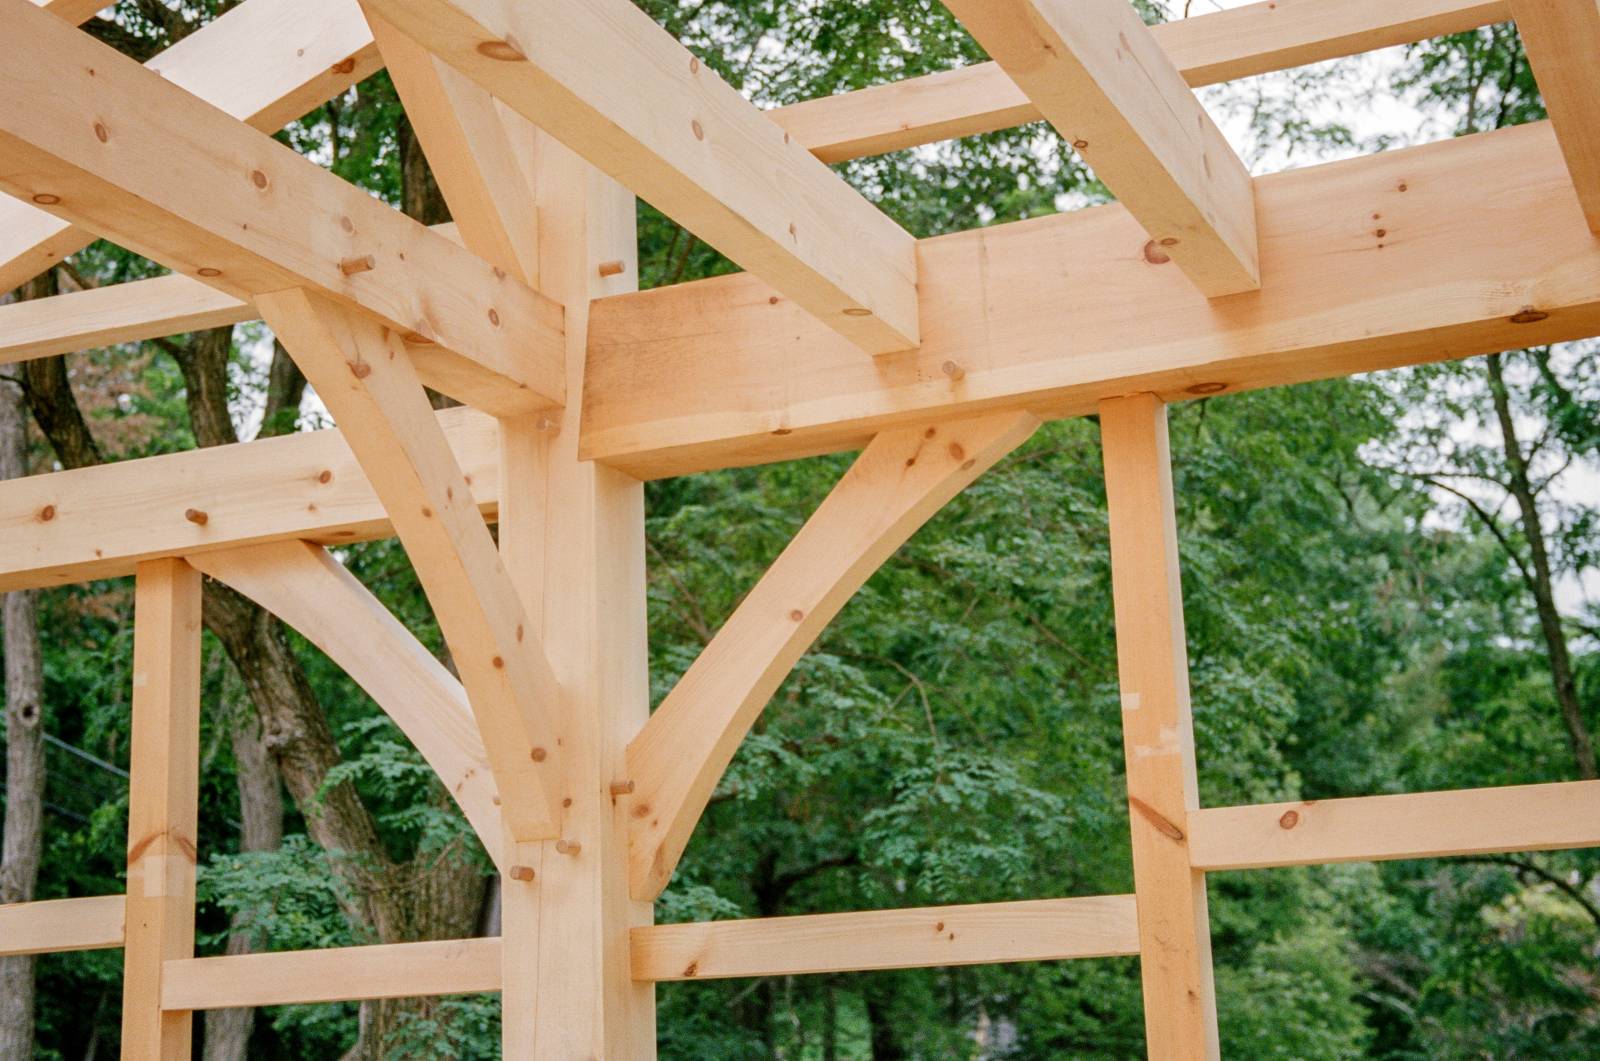 Visually interesting timber frame joinery